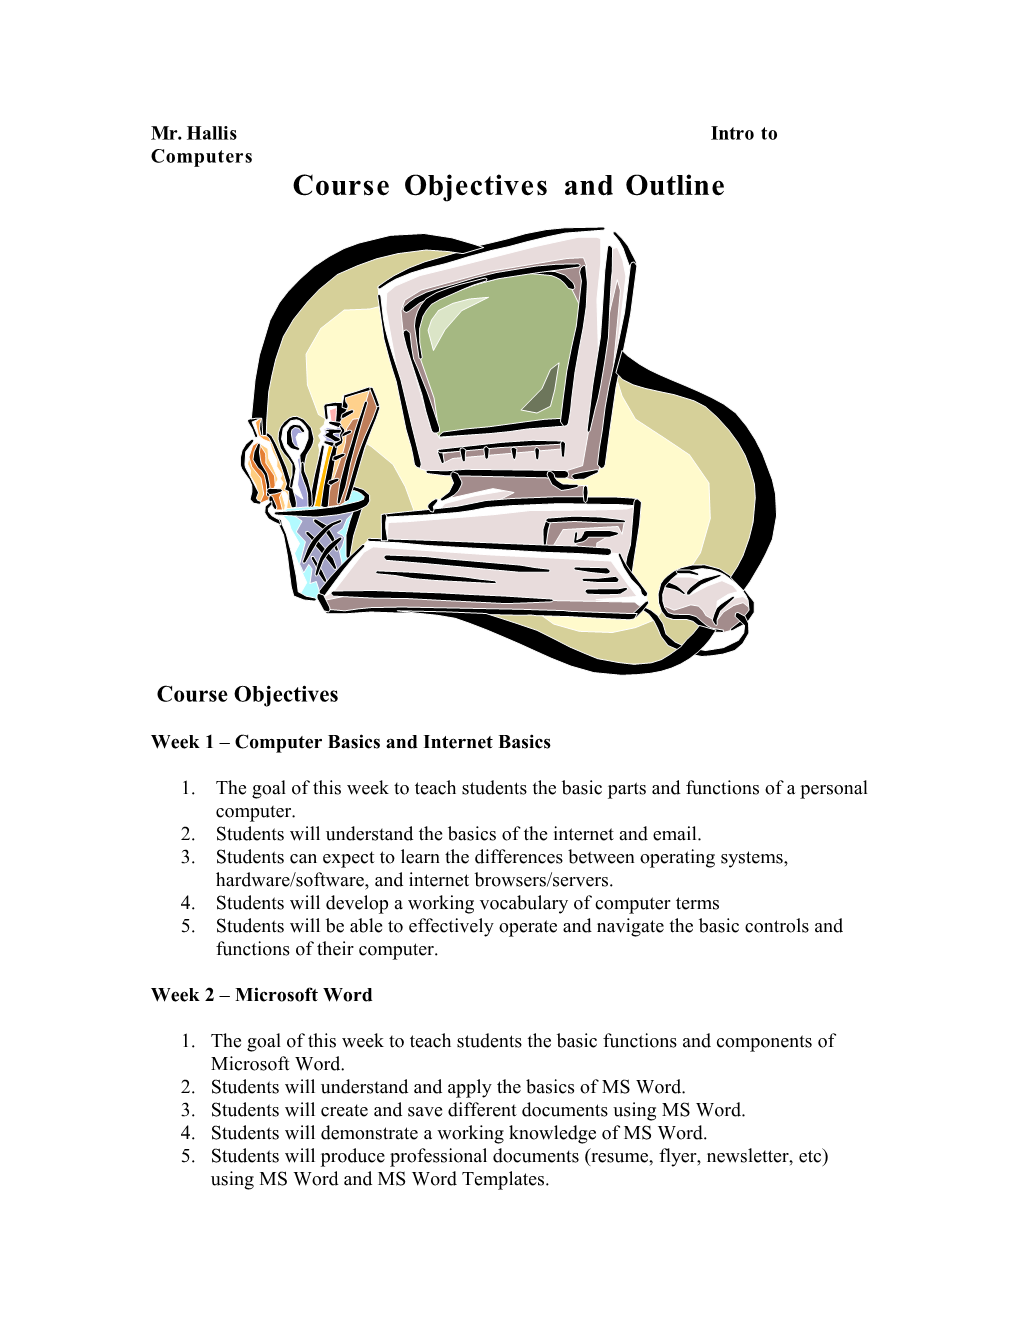 Course Objectives and Outline